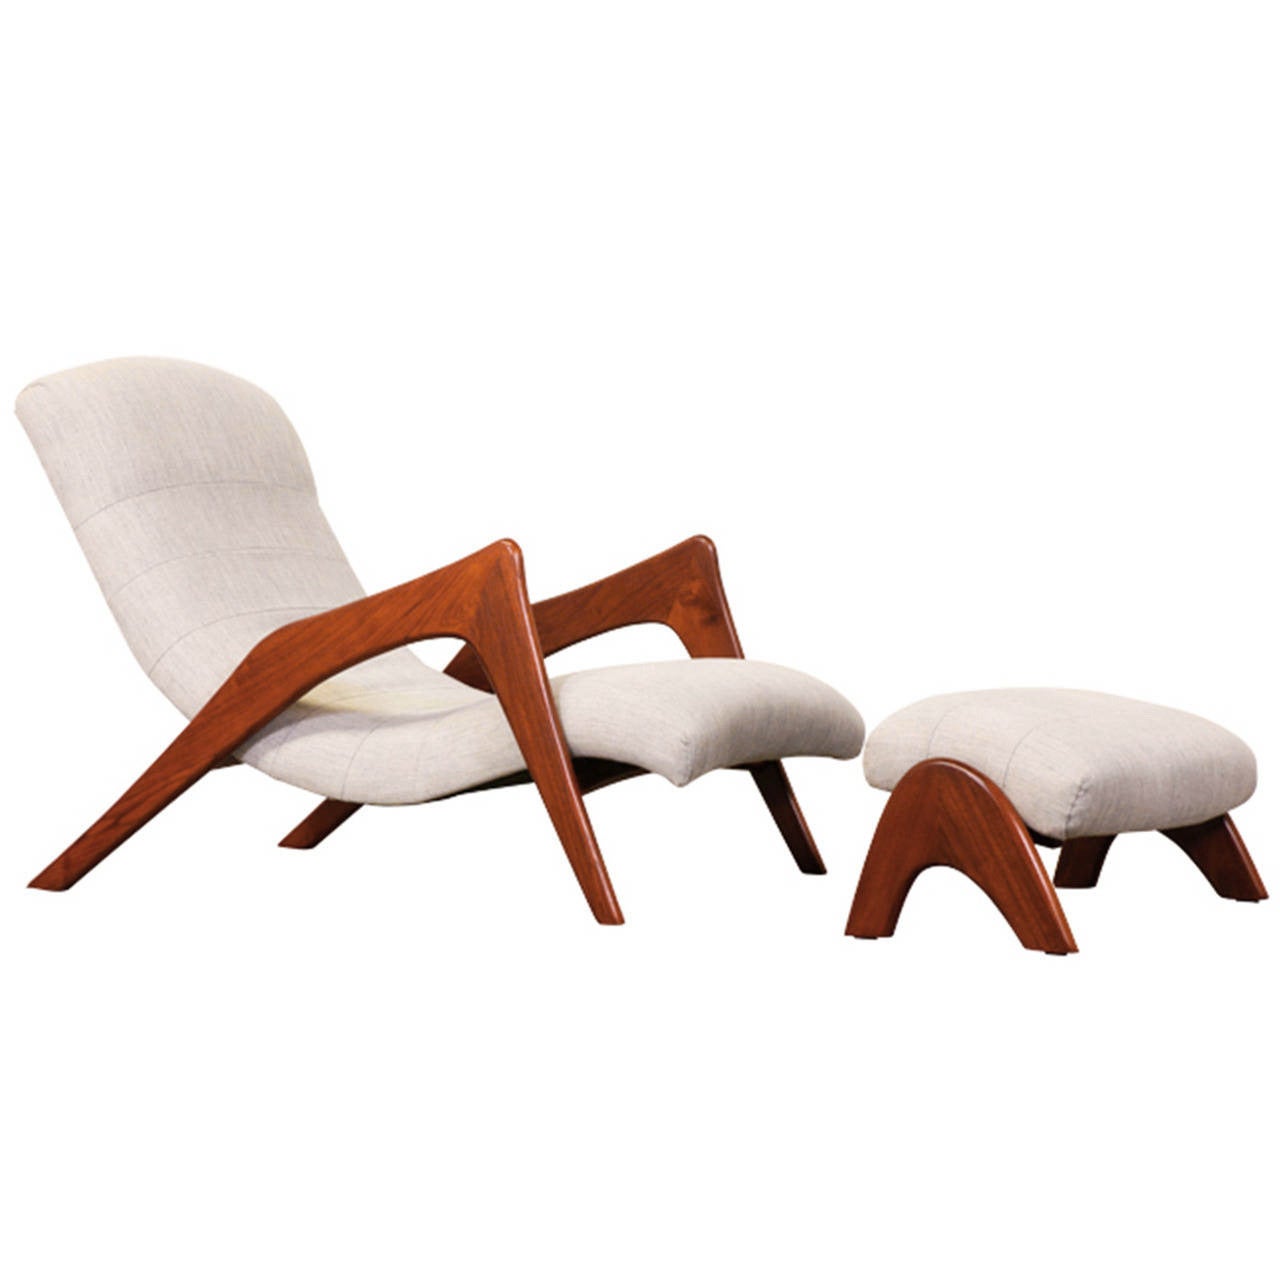 Adrian Pearsall “Grasshopper” Chaise Lounge w/ Ottoman for Craft Associates